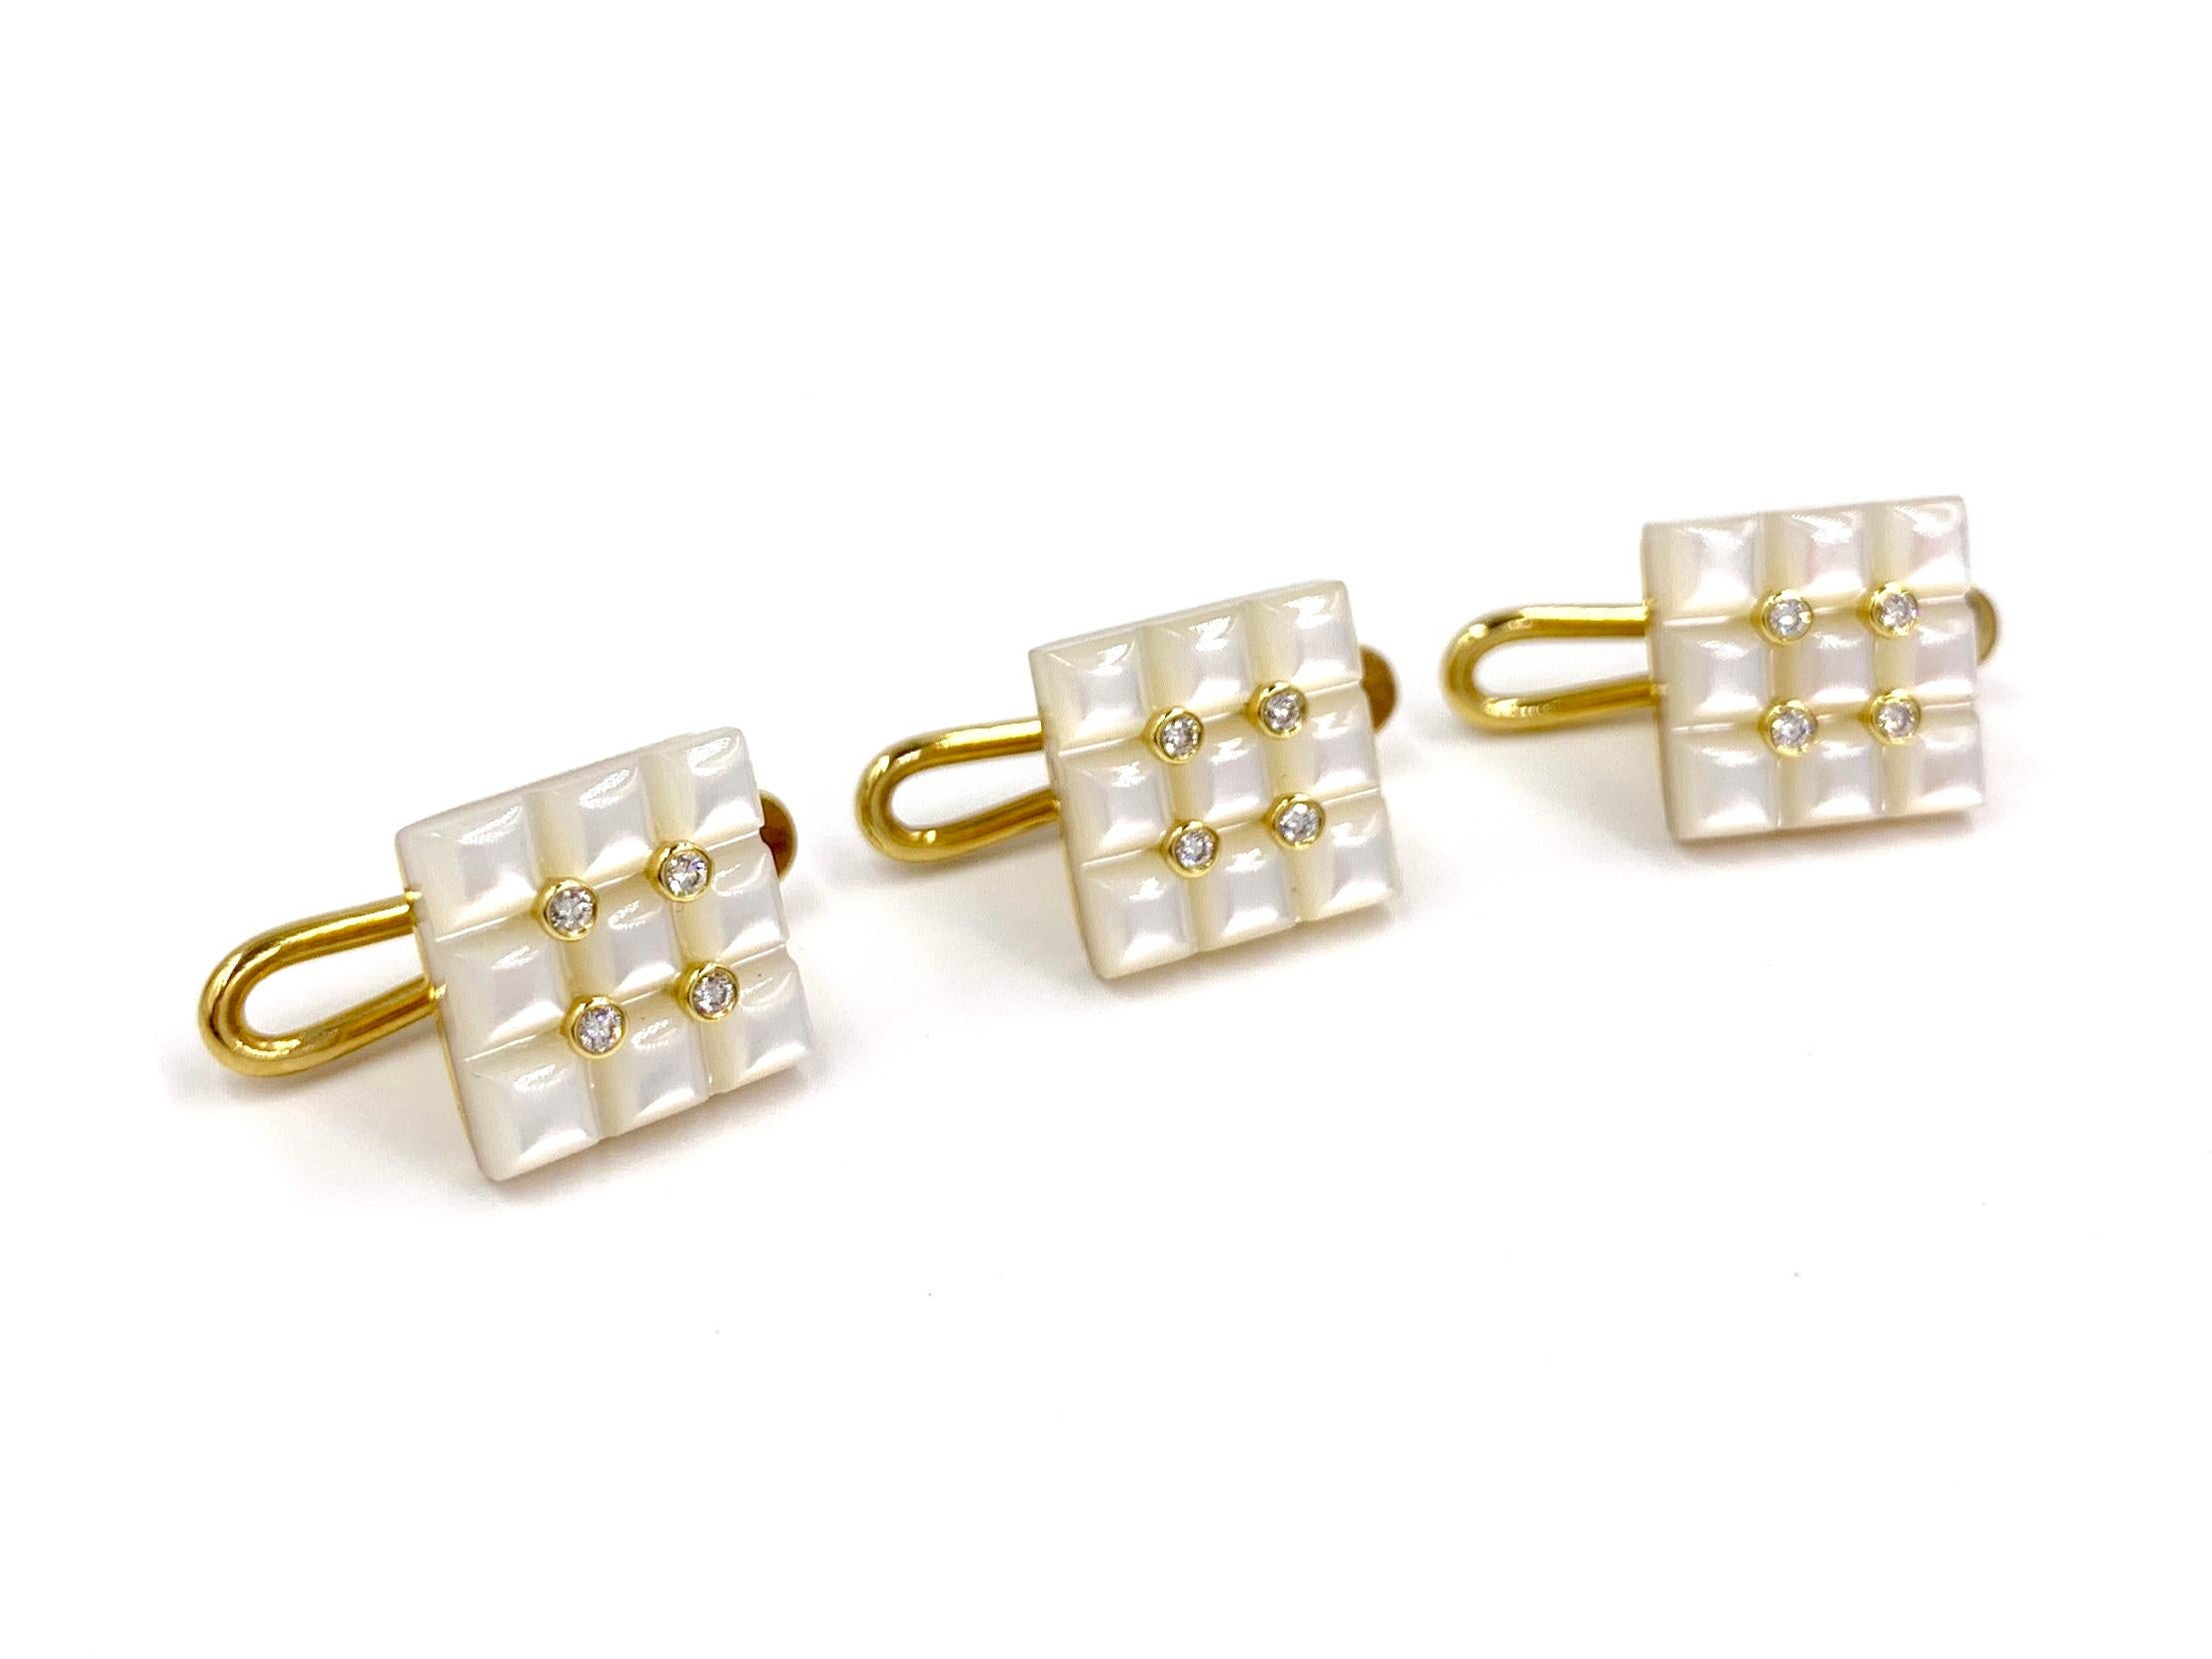 Set of 3 18 karat yellow gold elegantly designed square shirt studs by George Gero. Each stud features a carved lustrous mother of pearl adorned with four bezel set round diamonds. Diamond total weight is .09 carats at approximately F color, VS2